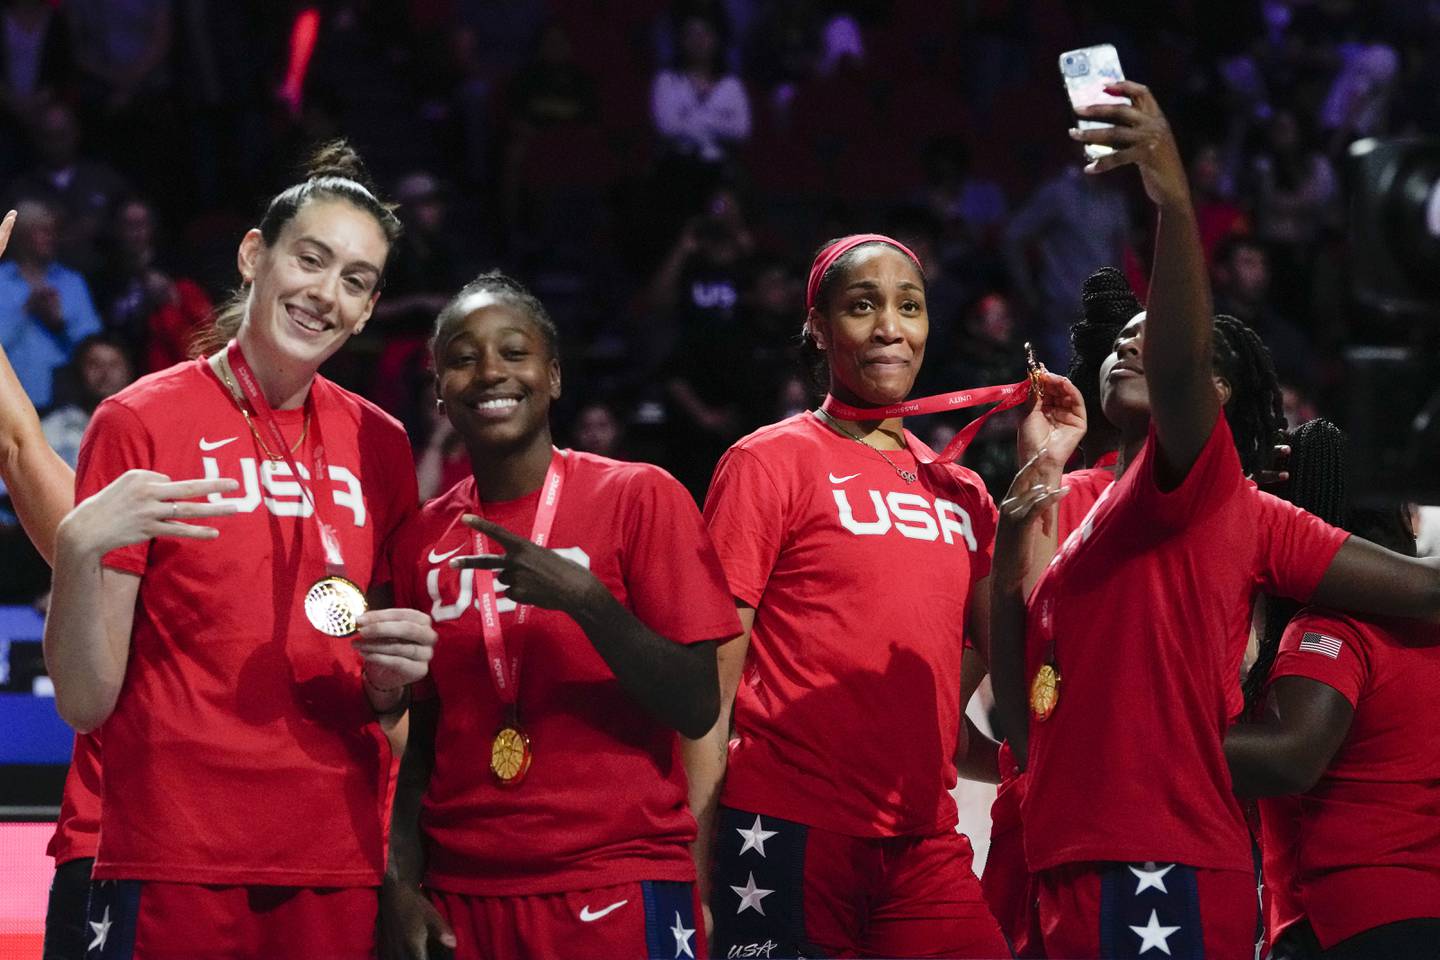 The U.S. gold medalists celebrate on the podium after defeating China in the final of the World Cup in Sydney, Australia, on Oct. 1, 2022.